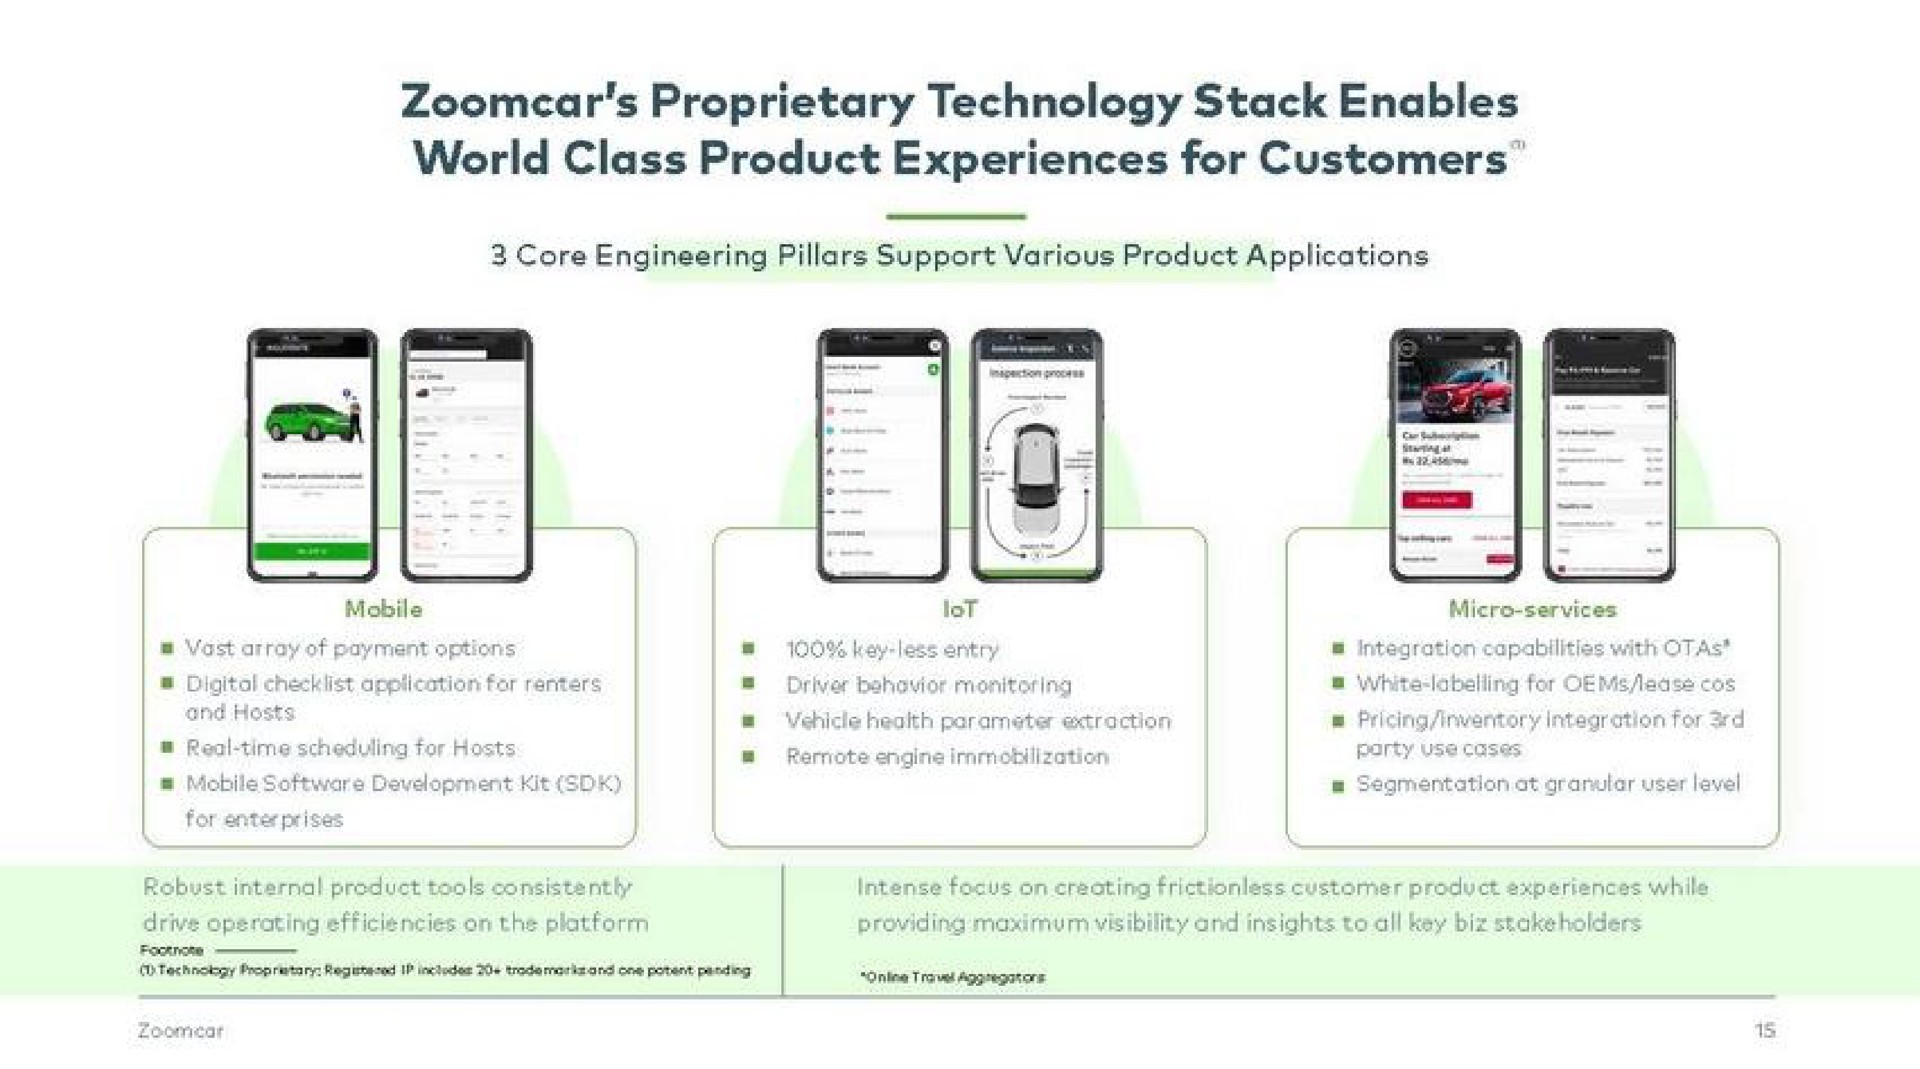 proprietary technology stack enables world class product experiences for customers | Zoomcar